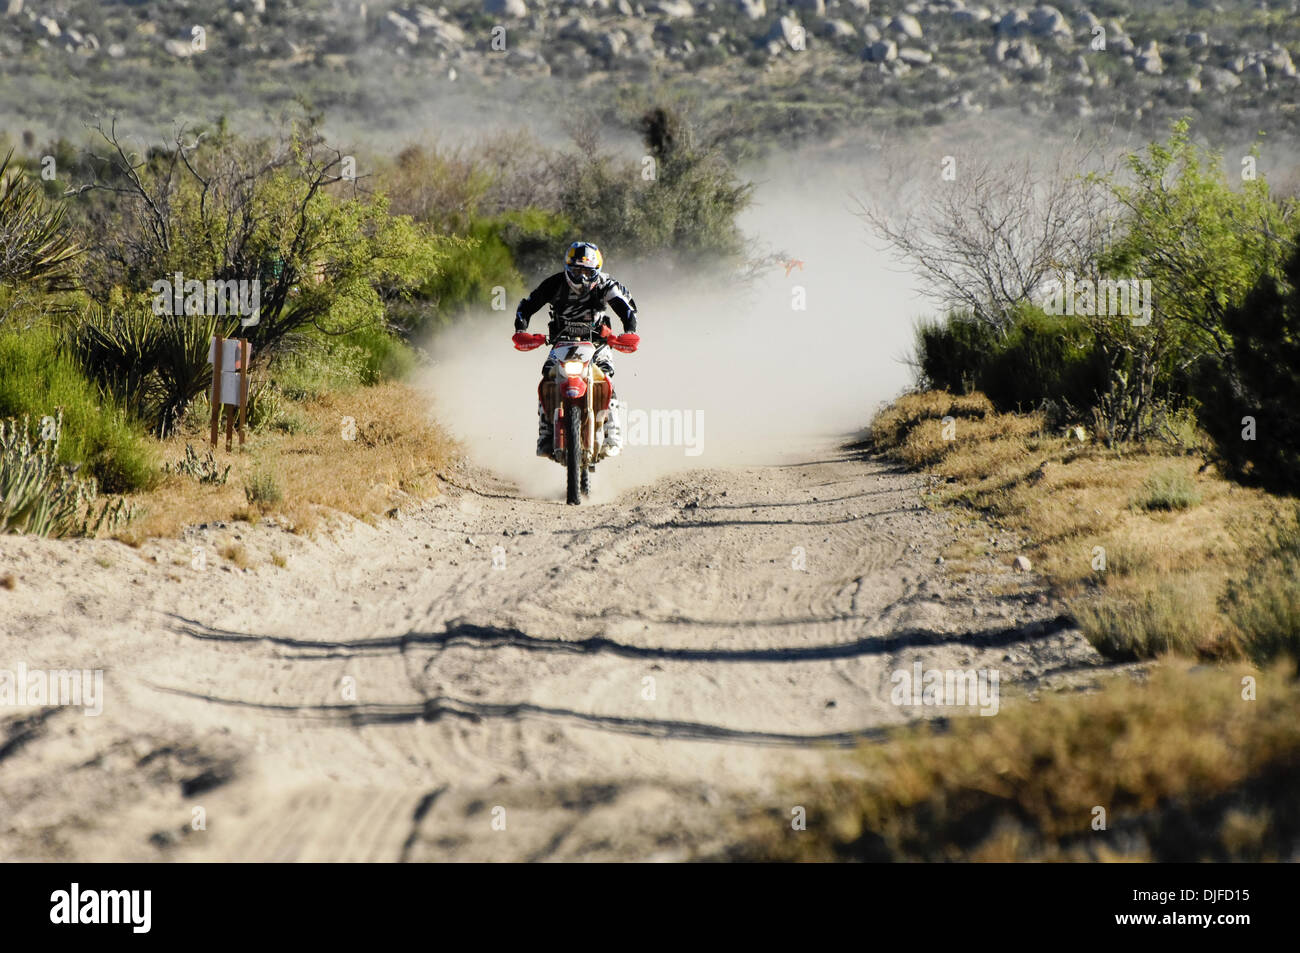 Jun 05, 2010 - Ensenada, Baja Norte, Mexico - KENDALL NORMAN rides to first in Class 22 and first overall in the 42nd Tecate SCORE Baja 500. The race covered 438.81 miles of desert in Baja, California. (Credit Image: © Stan Sholik/ZUMApress.com) Stock Photo